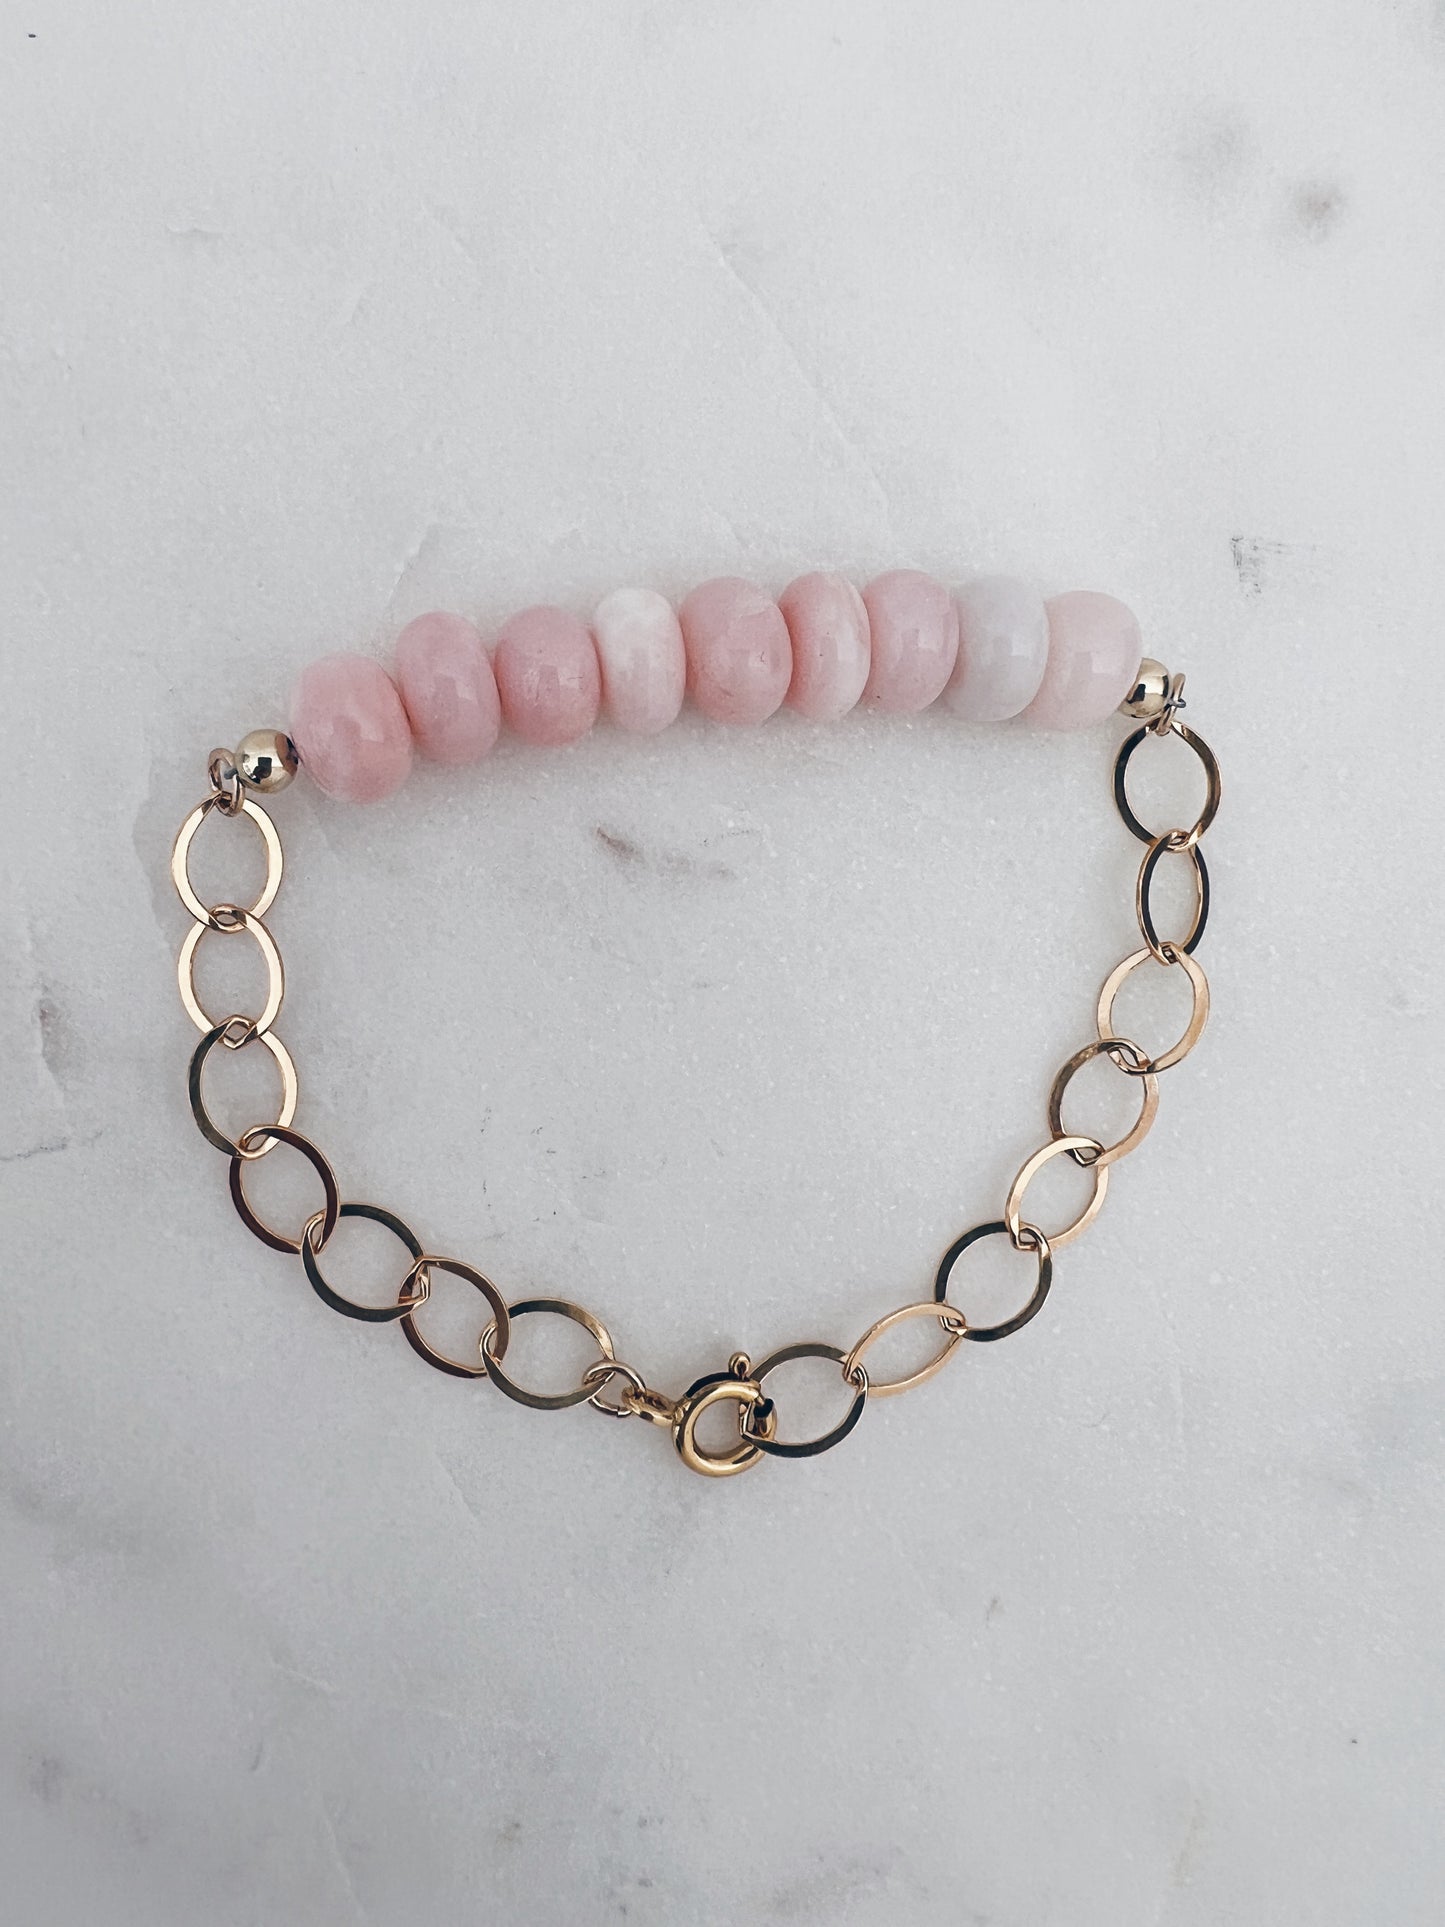 Opal Choker Necklace + More Options